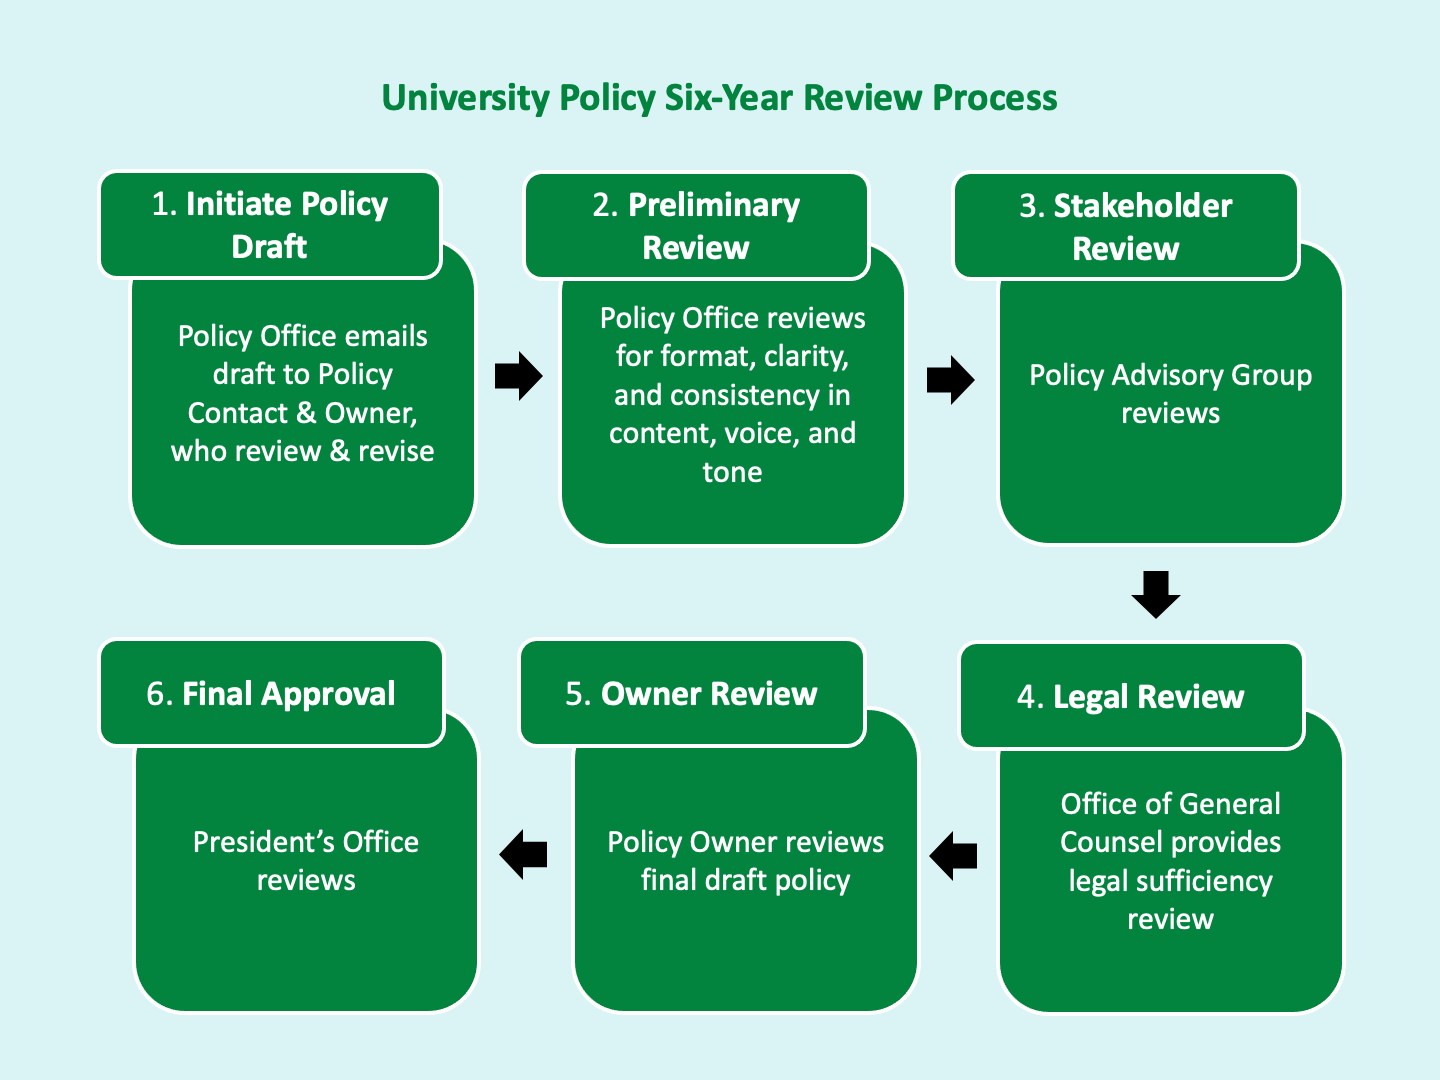 Flow chart displaying the 6 major steps for the policy review process, including: 1. Policy Office initiating draft with the Policy Contact & Owner, 2. Policy Office reviewing draft for formatting consistency, 3. Policy Advisory Group review, 4. Office of General Counsel Review, 5. Policy Owner review, and 6. Office of President review.